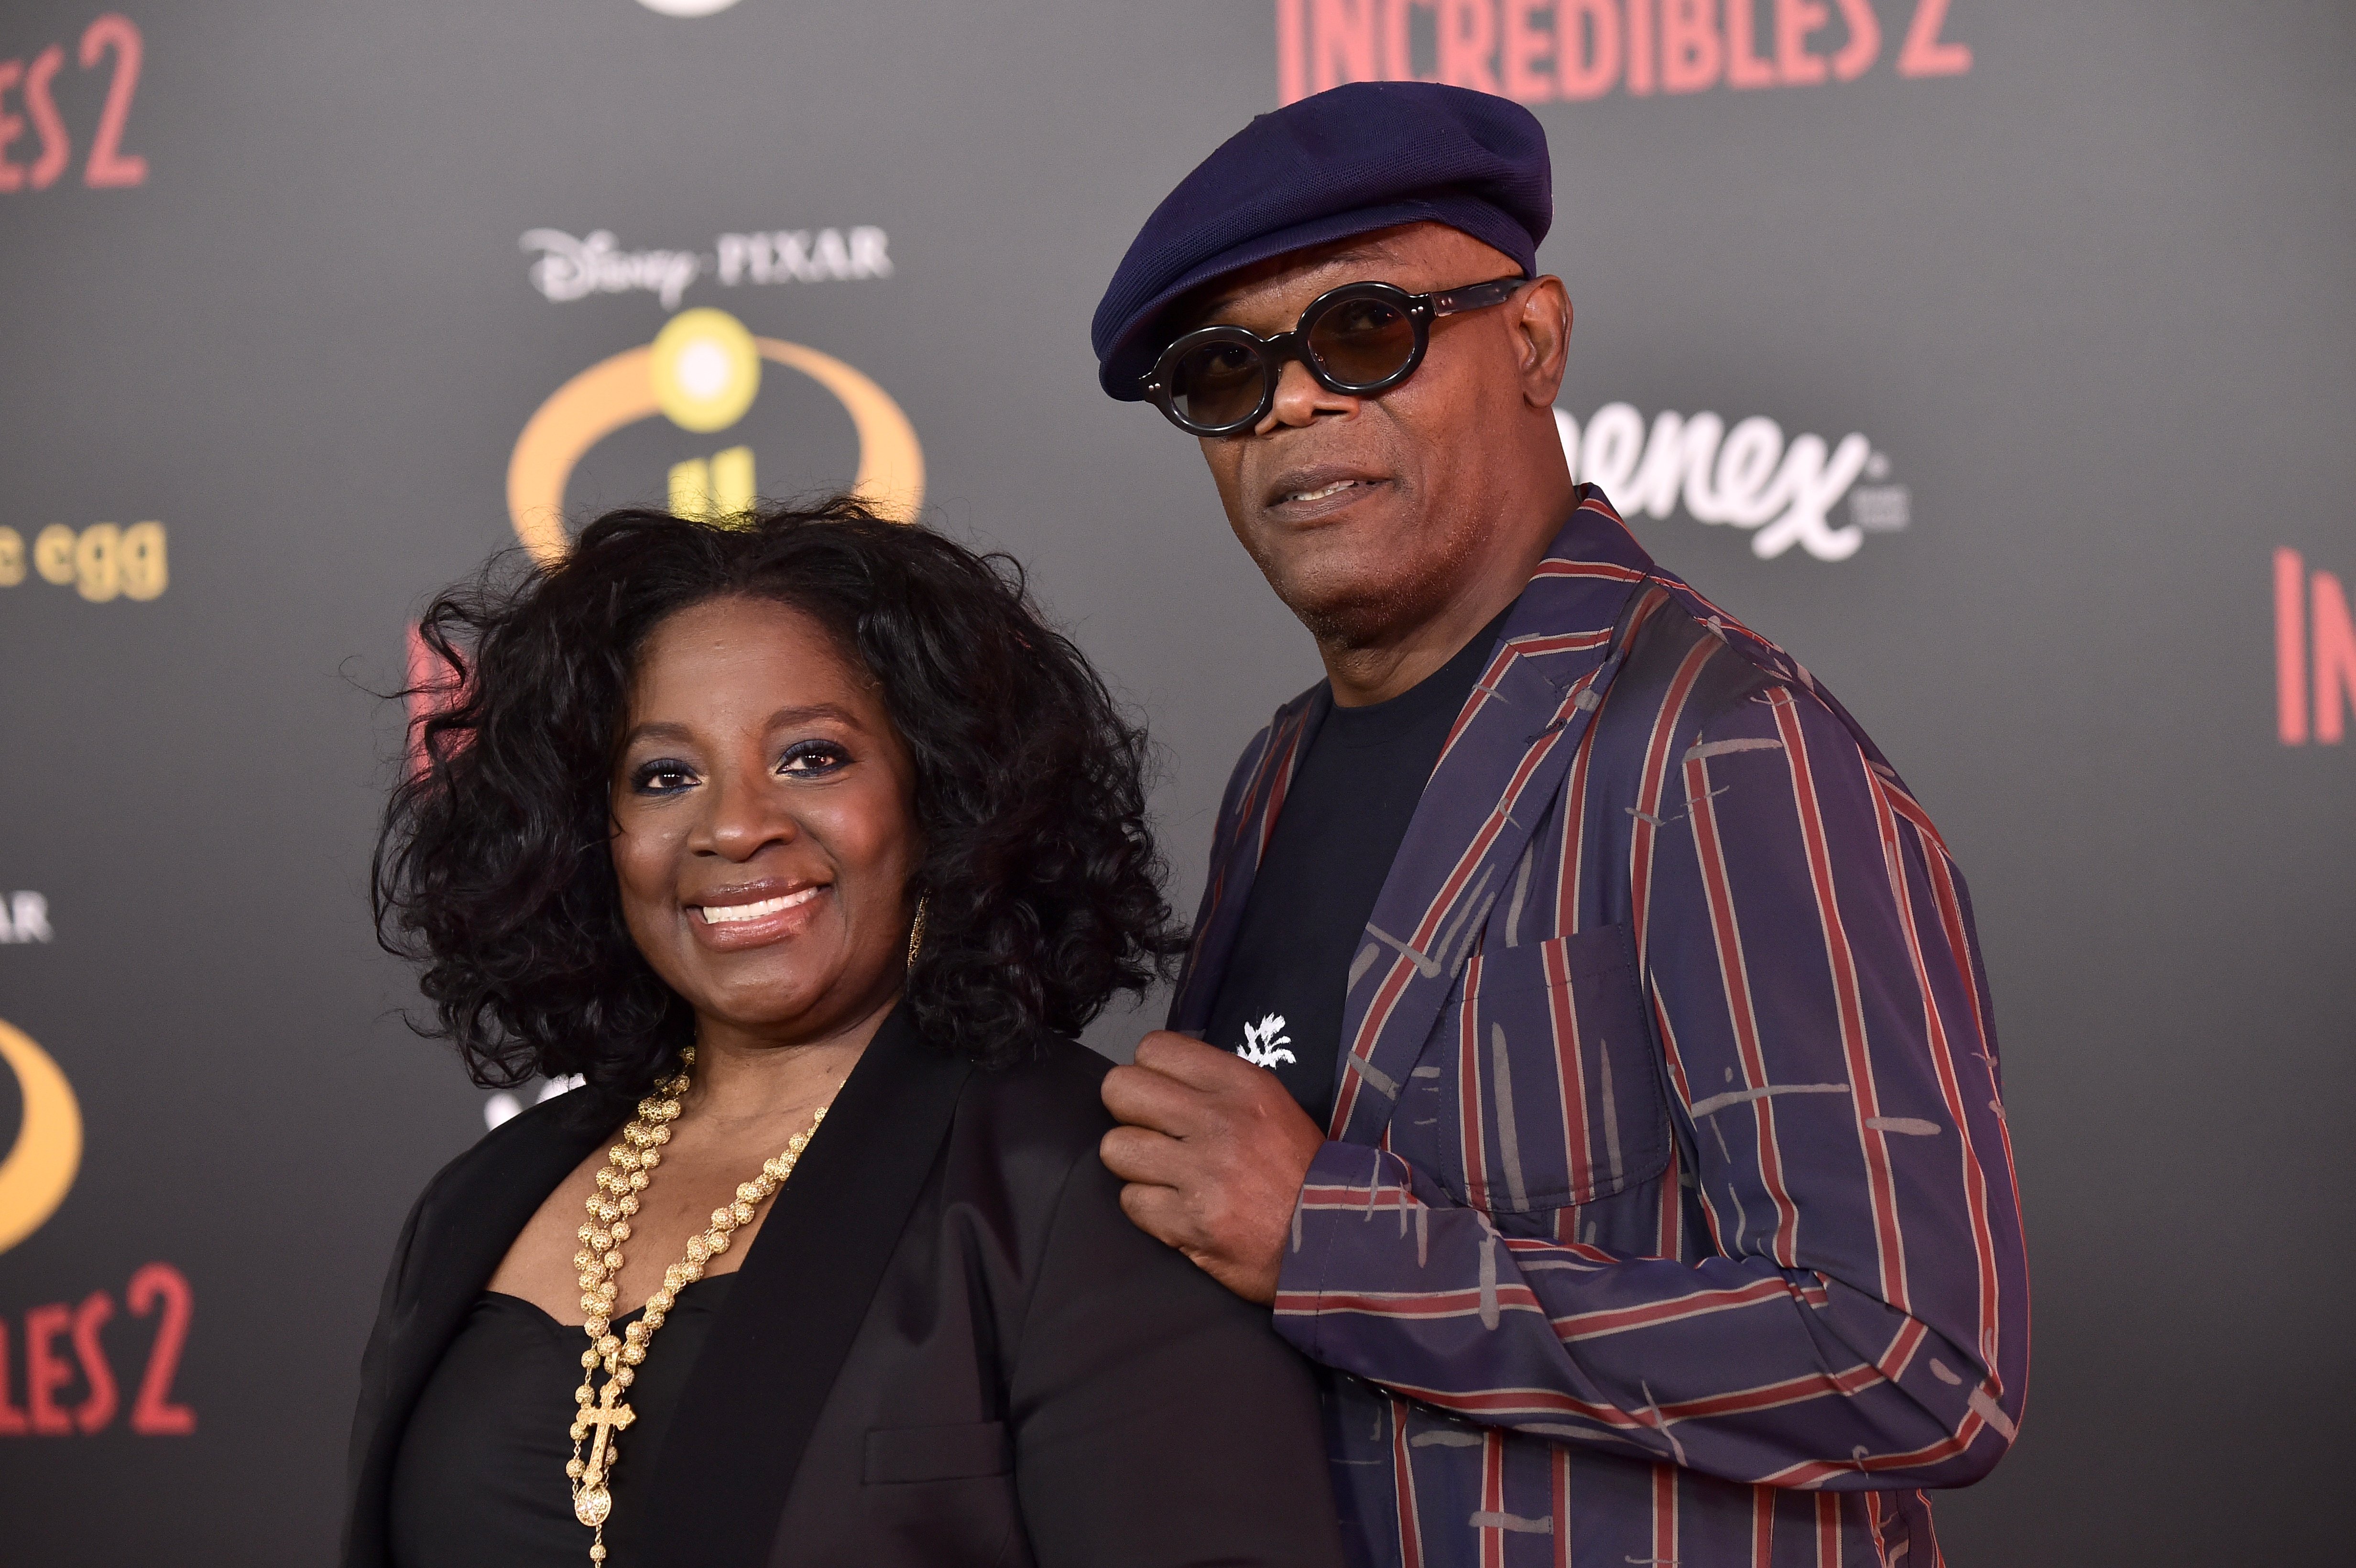 Samuel L. Jackson, LaTanya Richardson attend Premiere Of Disney And Pixar's "Incredibles 2" at the El Capitan Theatre on June 5, 2018, in Los Angeles, California. | Photo: Getty Images.